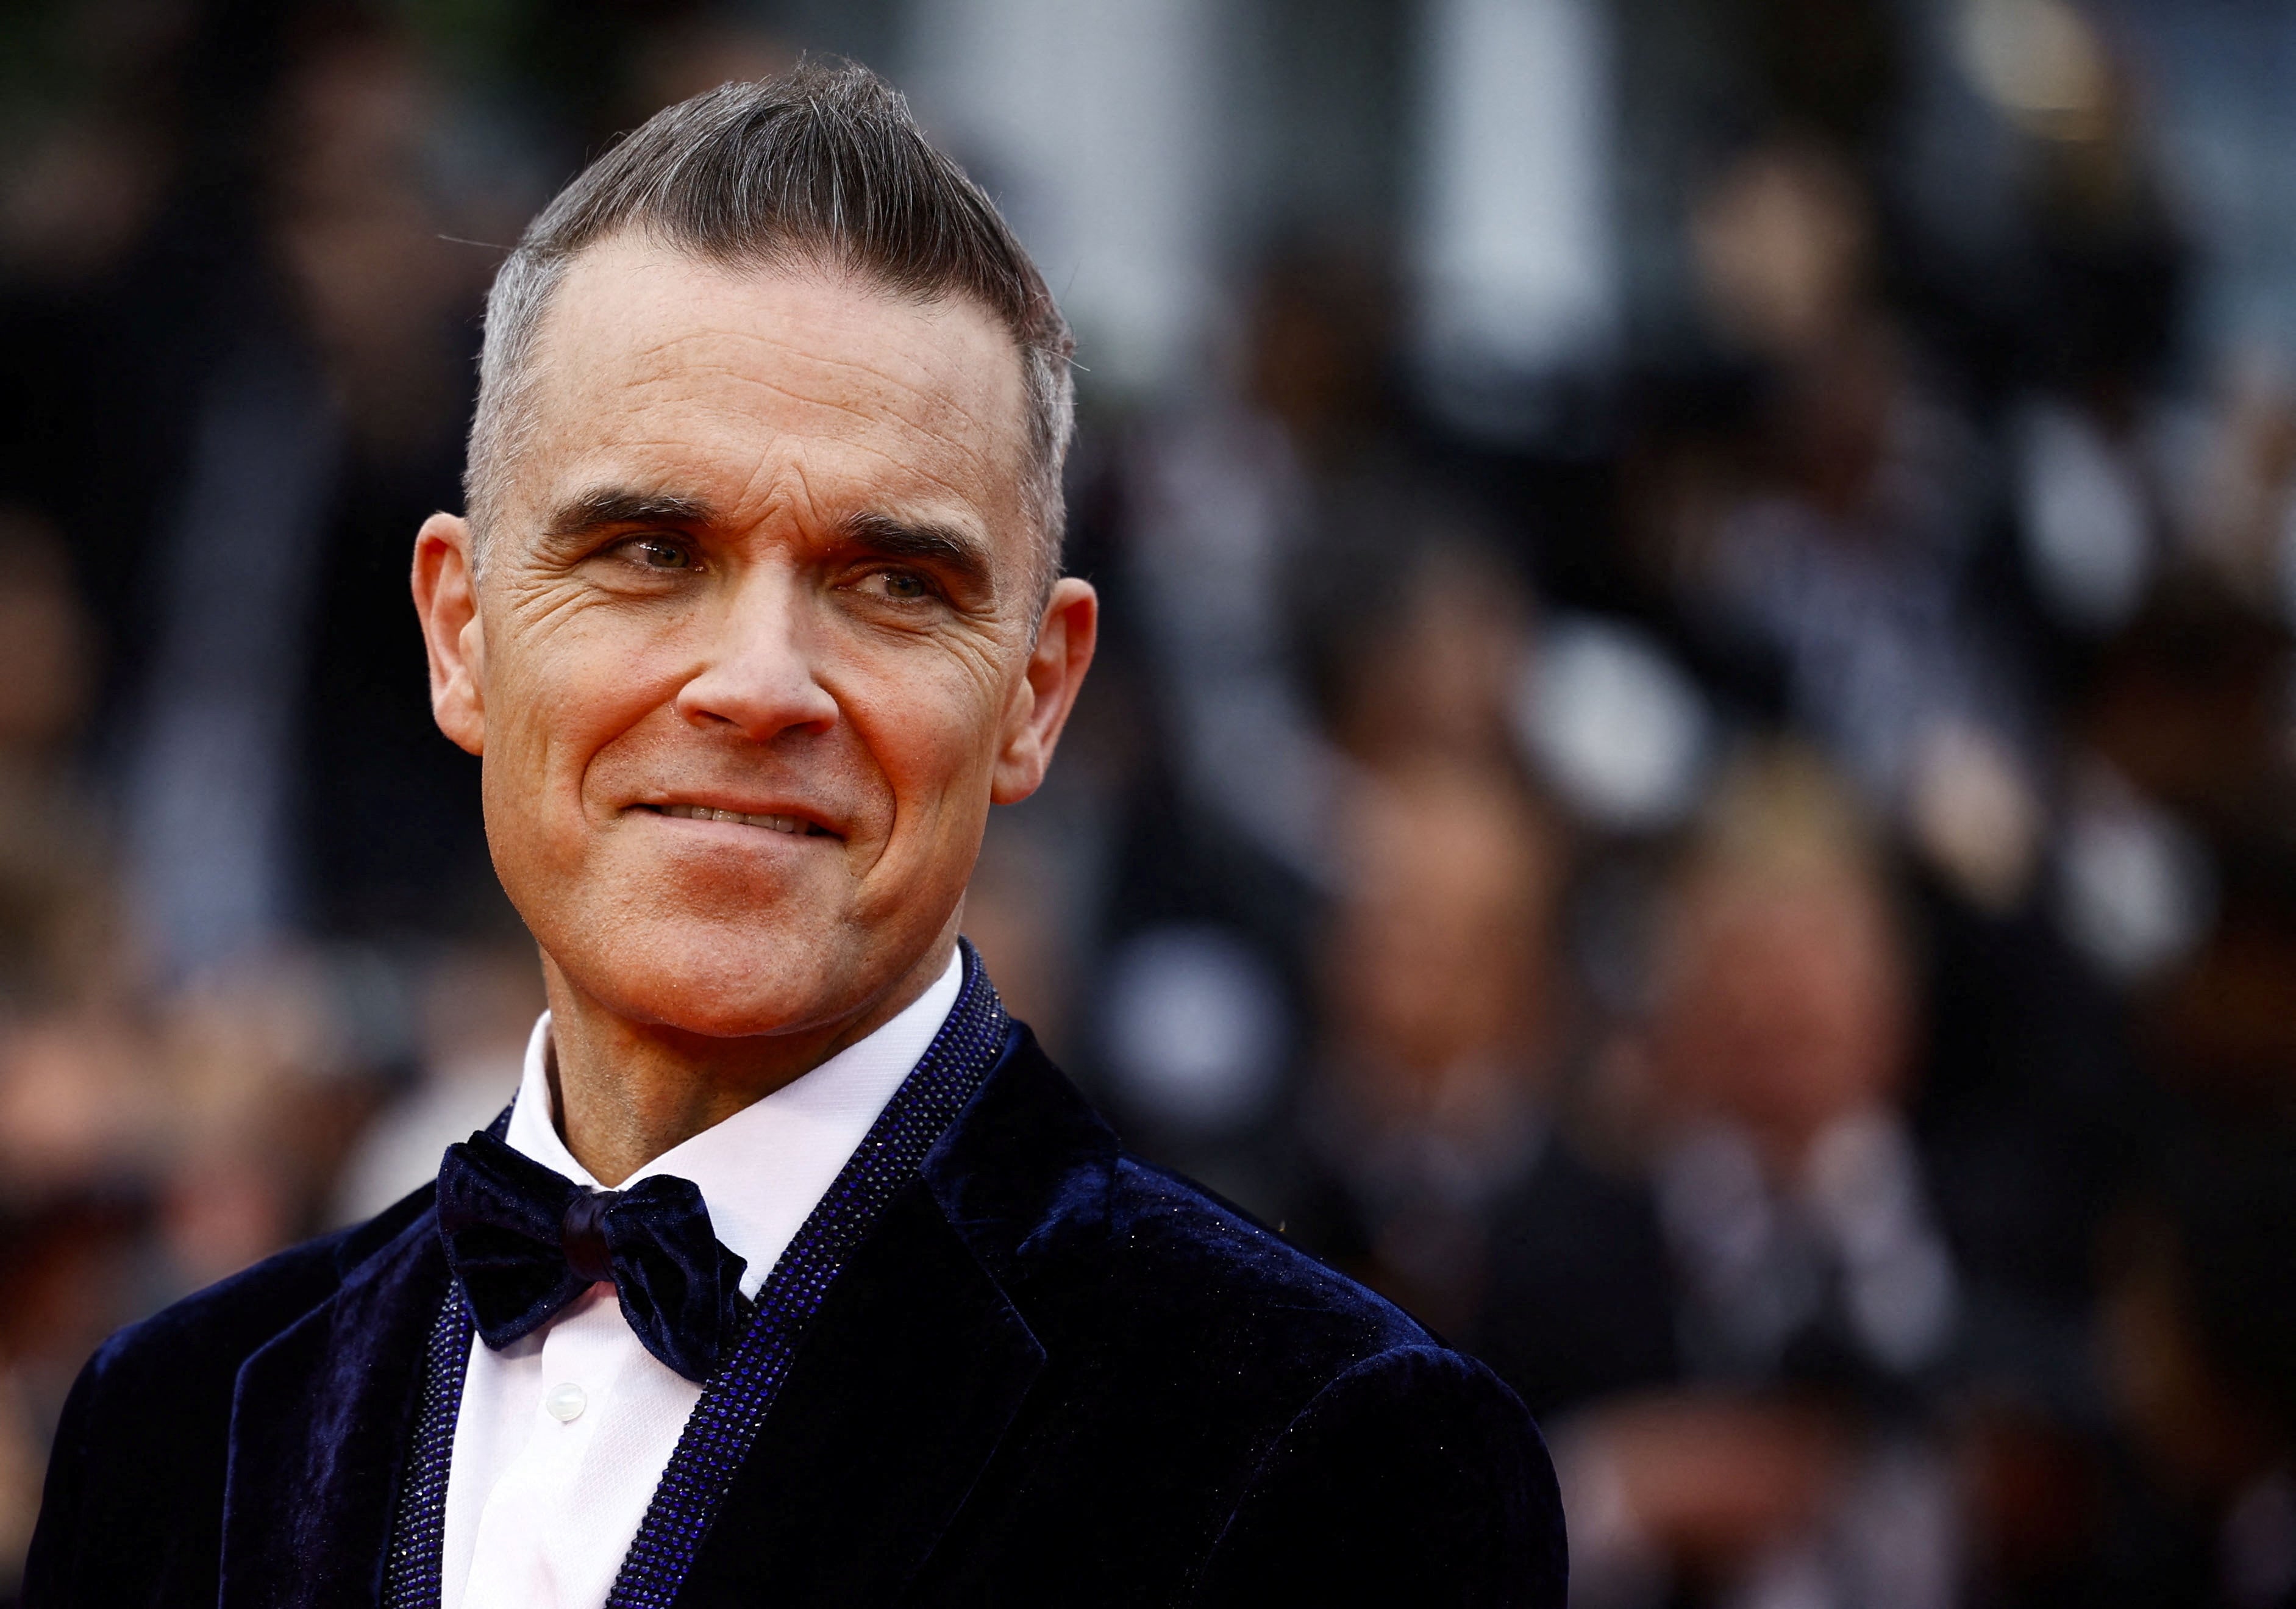 Robbie Williams is known for his tongue-in-cheek humour